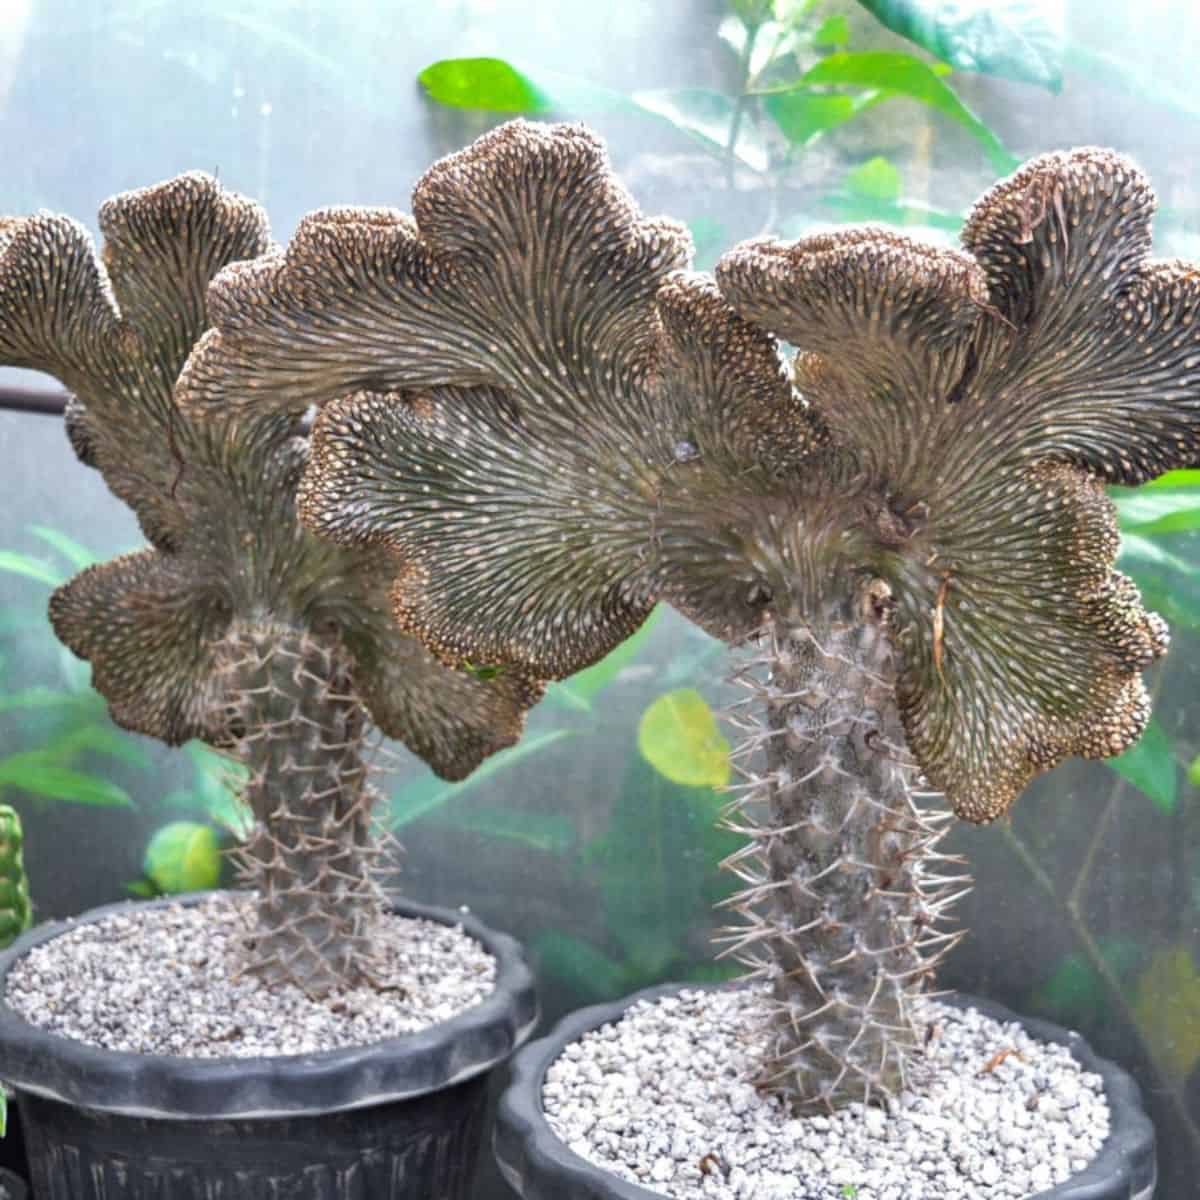 Crested cactuses growing in pots.